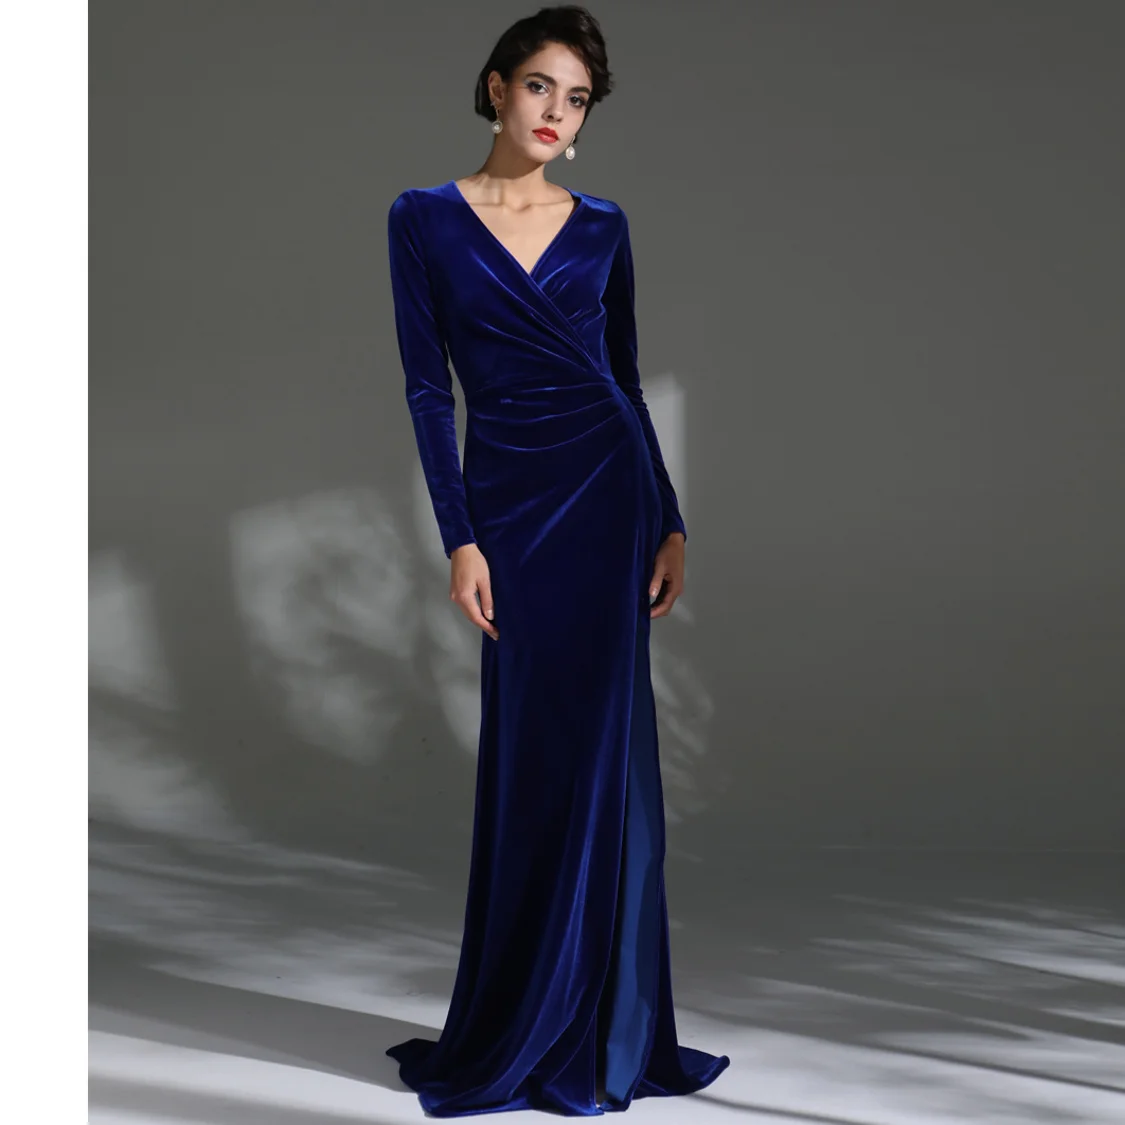 Women Formal Prom Dresses Classical V-Neck Chiffion Open Fork Elegant Evening Dress Floor-Length Mono Draped Pleat Party Gowns